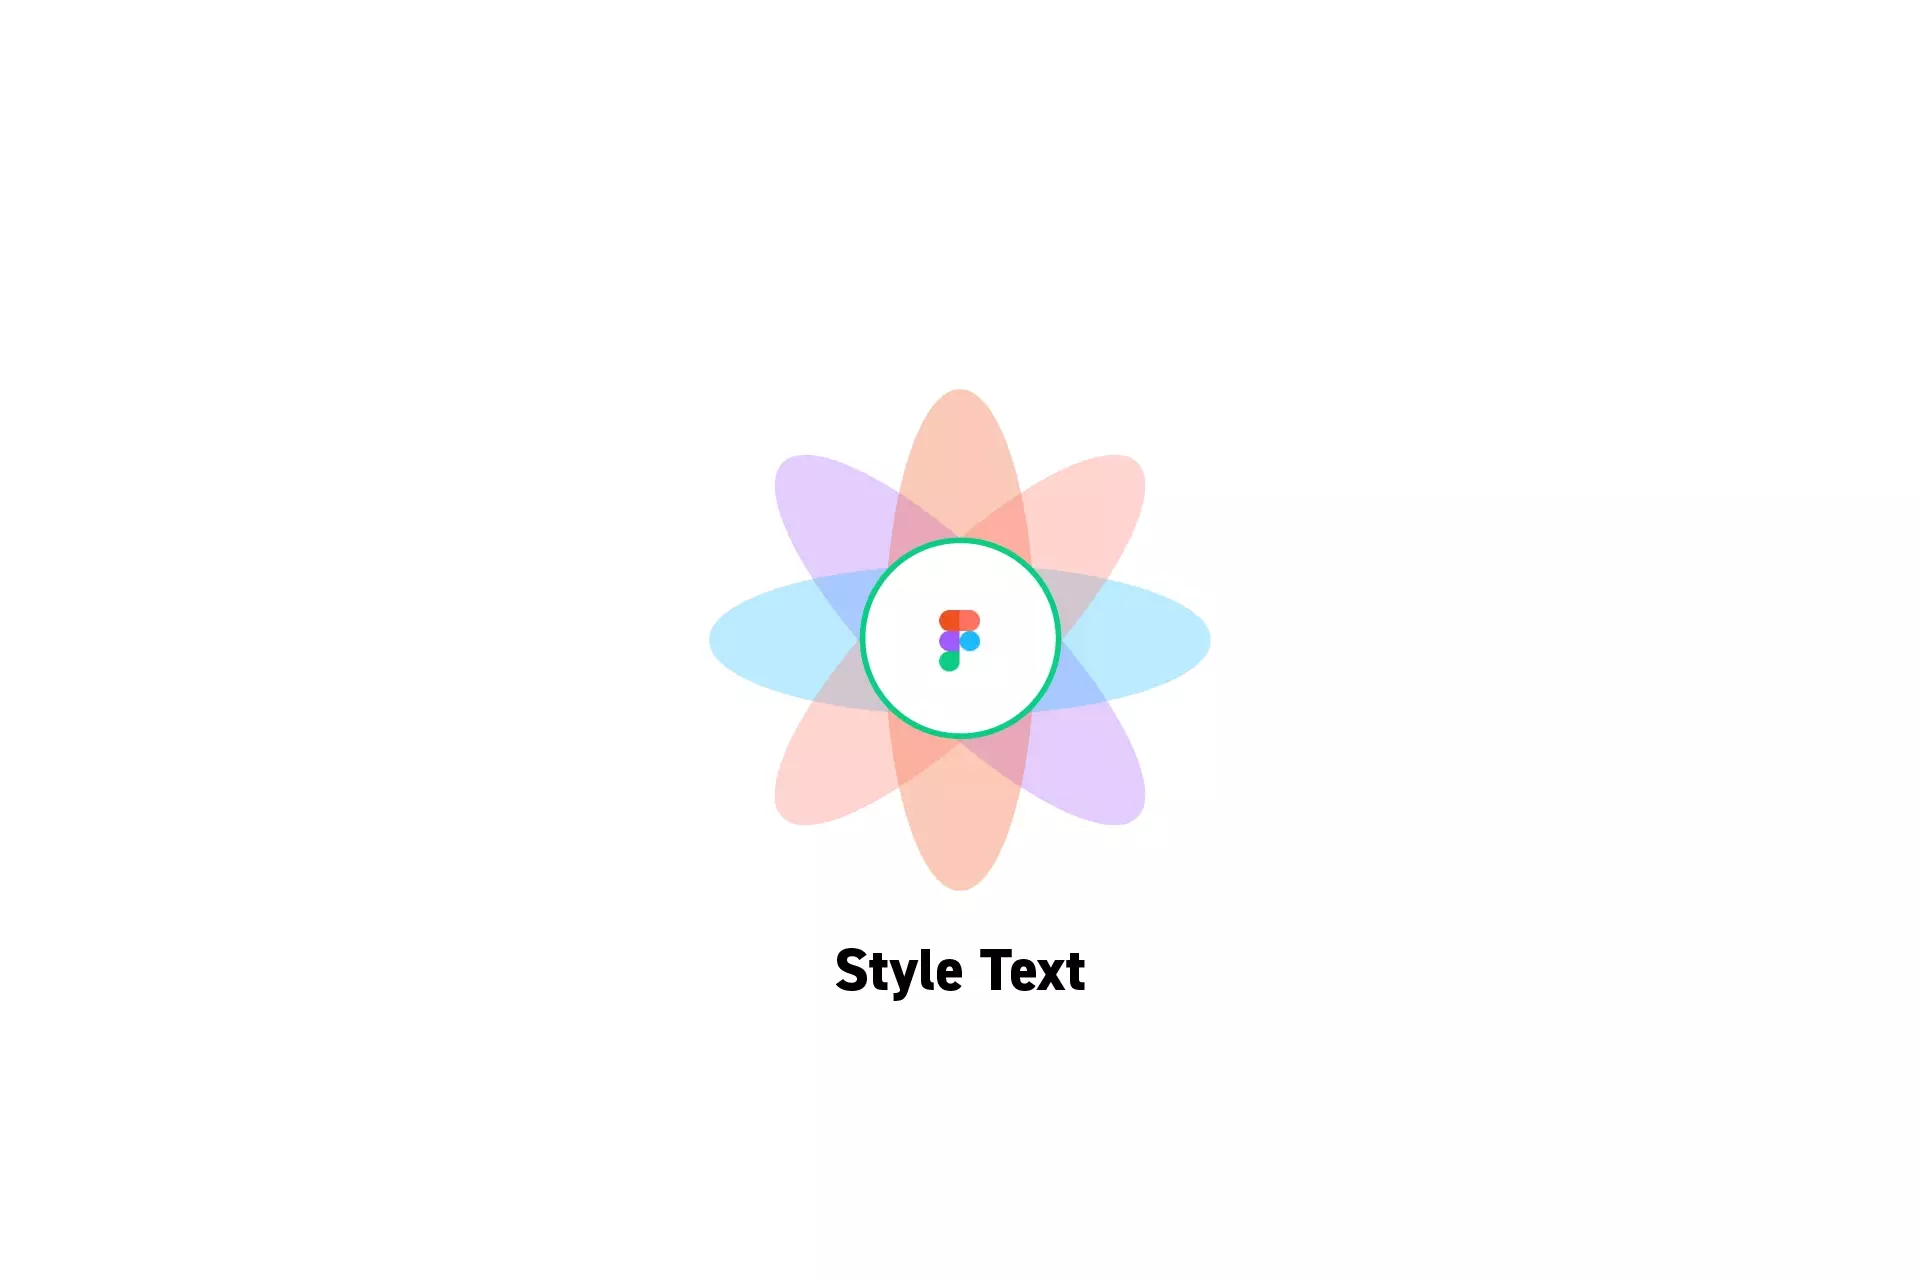 A flower that represents Figma with the text “Style Text” beneath it.